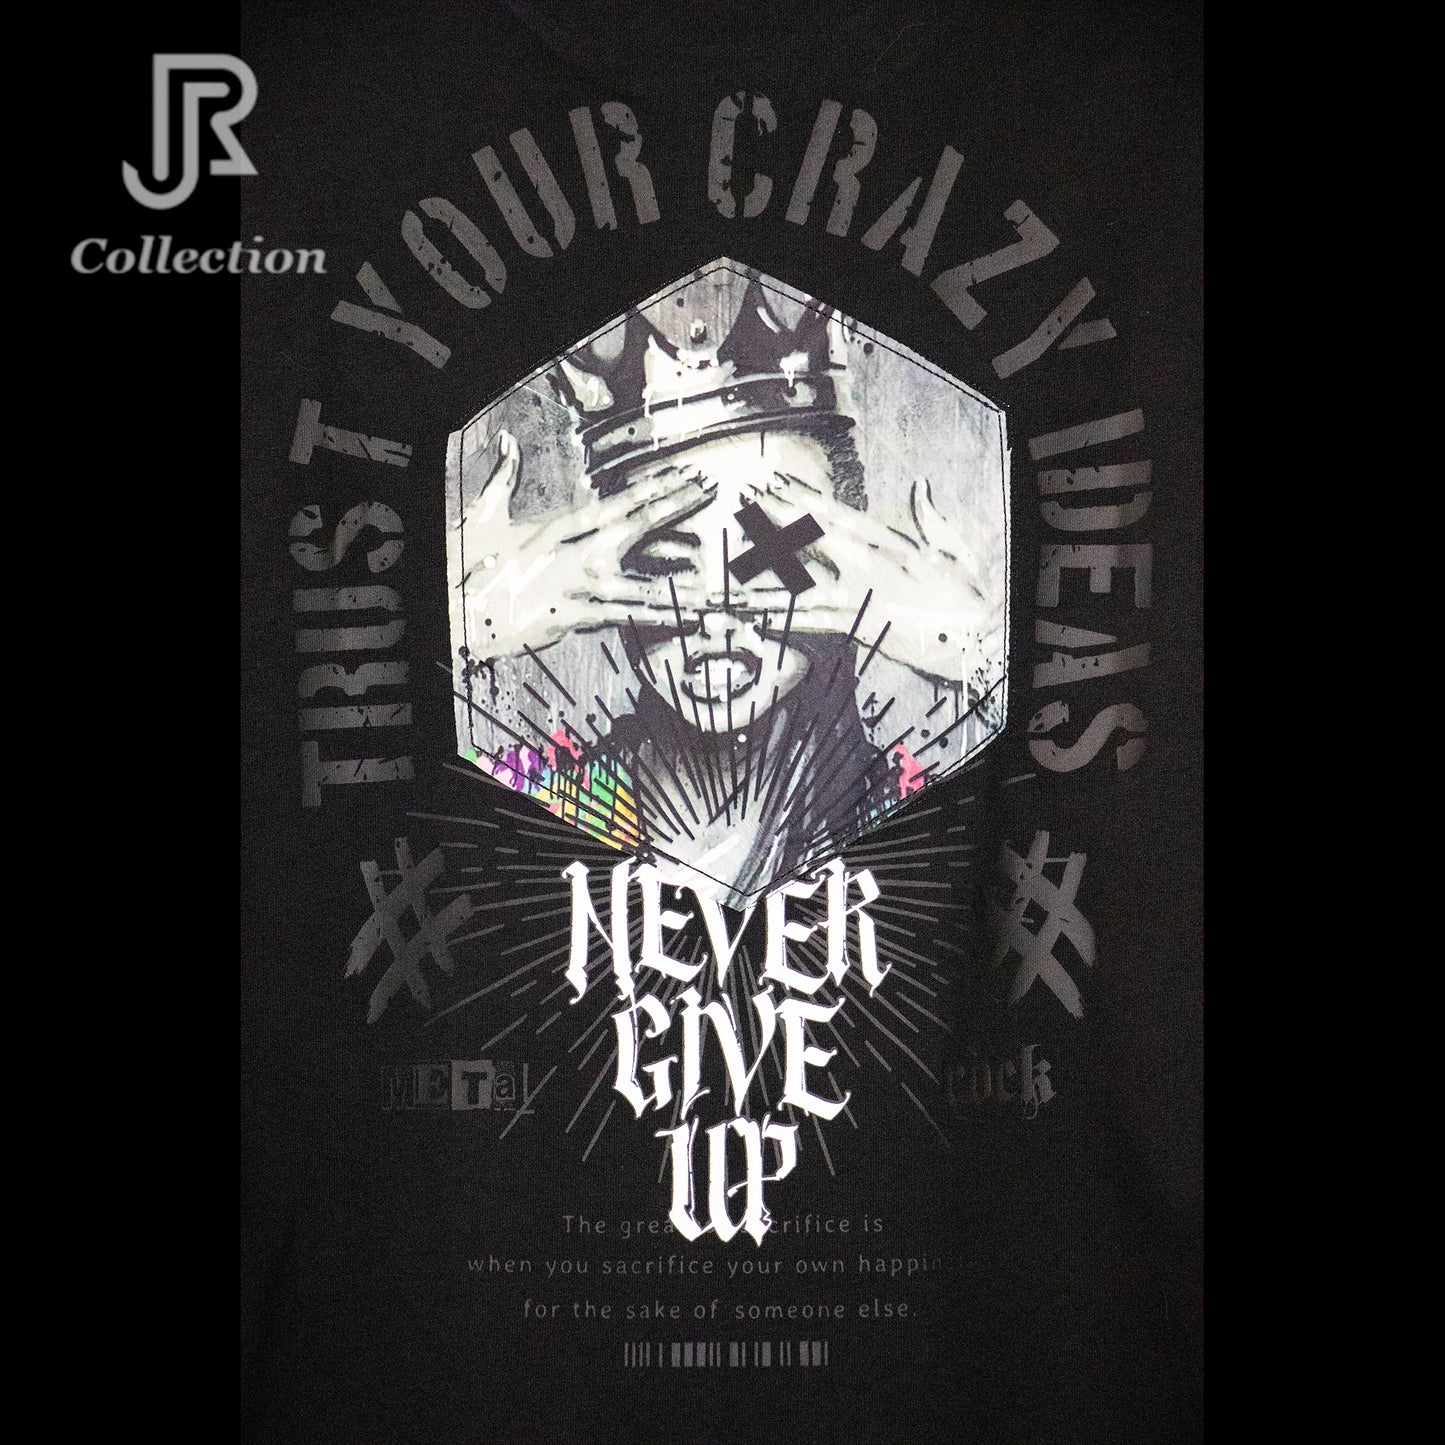 Oversized High-Quality T-Shirt (% 100 Eco-Friendly Cotton), Durable, Fashionable and Stylish, Unisex, Designed by RJcollection